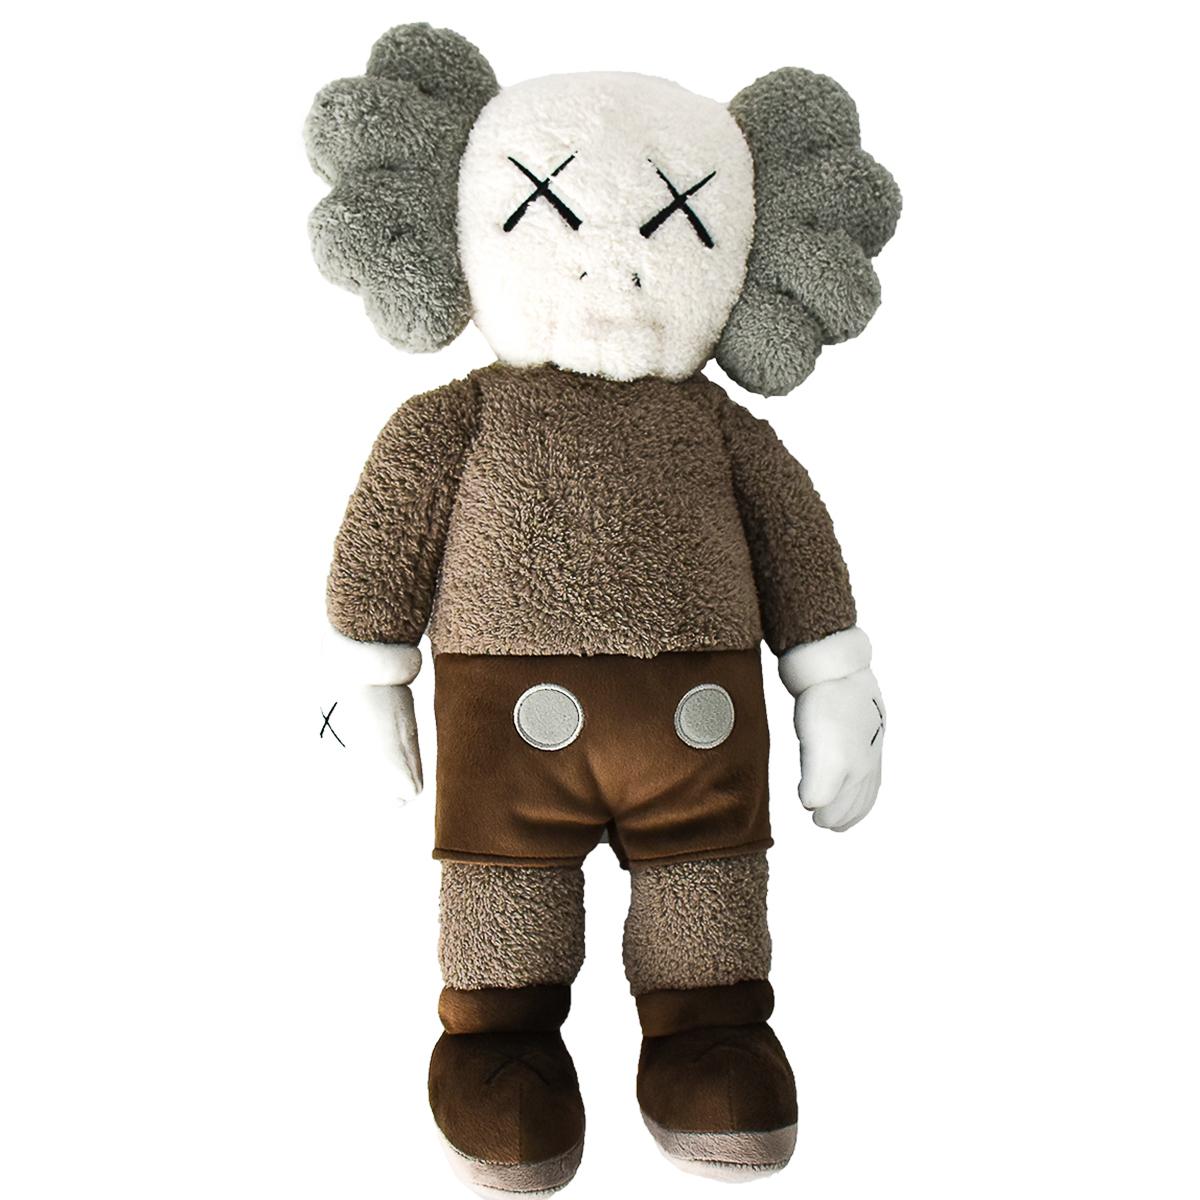 Limited edition plush in brown.
Made for the Holiday Hong Kong 2019 collection.
Kaws signature stitched on bottom of foot.
Packaged in Kaws Holiday drawstring bag.
20 inches tall.



RELATED:
Invader, KAWS, Banksy, Shepard Fairey, Blek Le Rat, Cleon